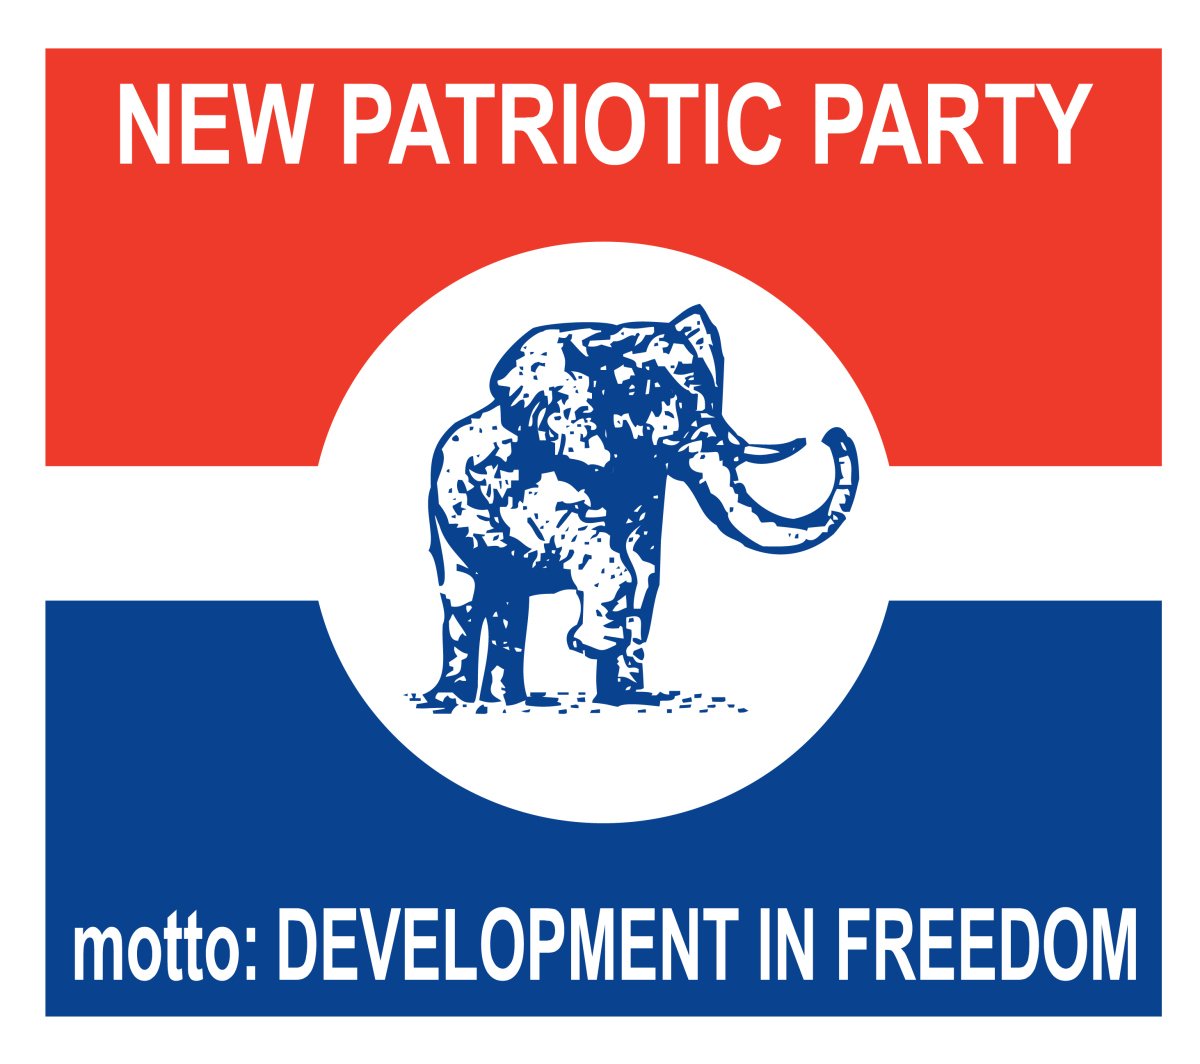 NPP Executive Collapses After Losing Election